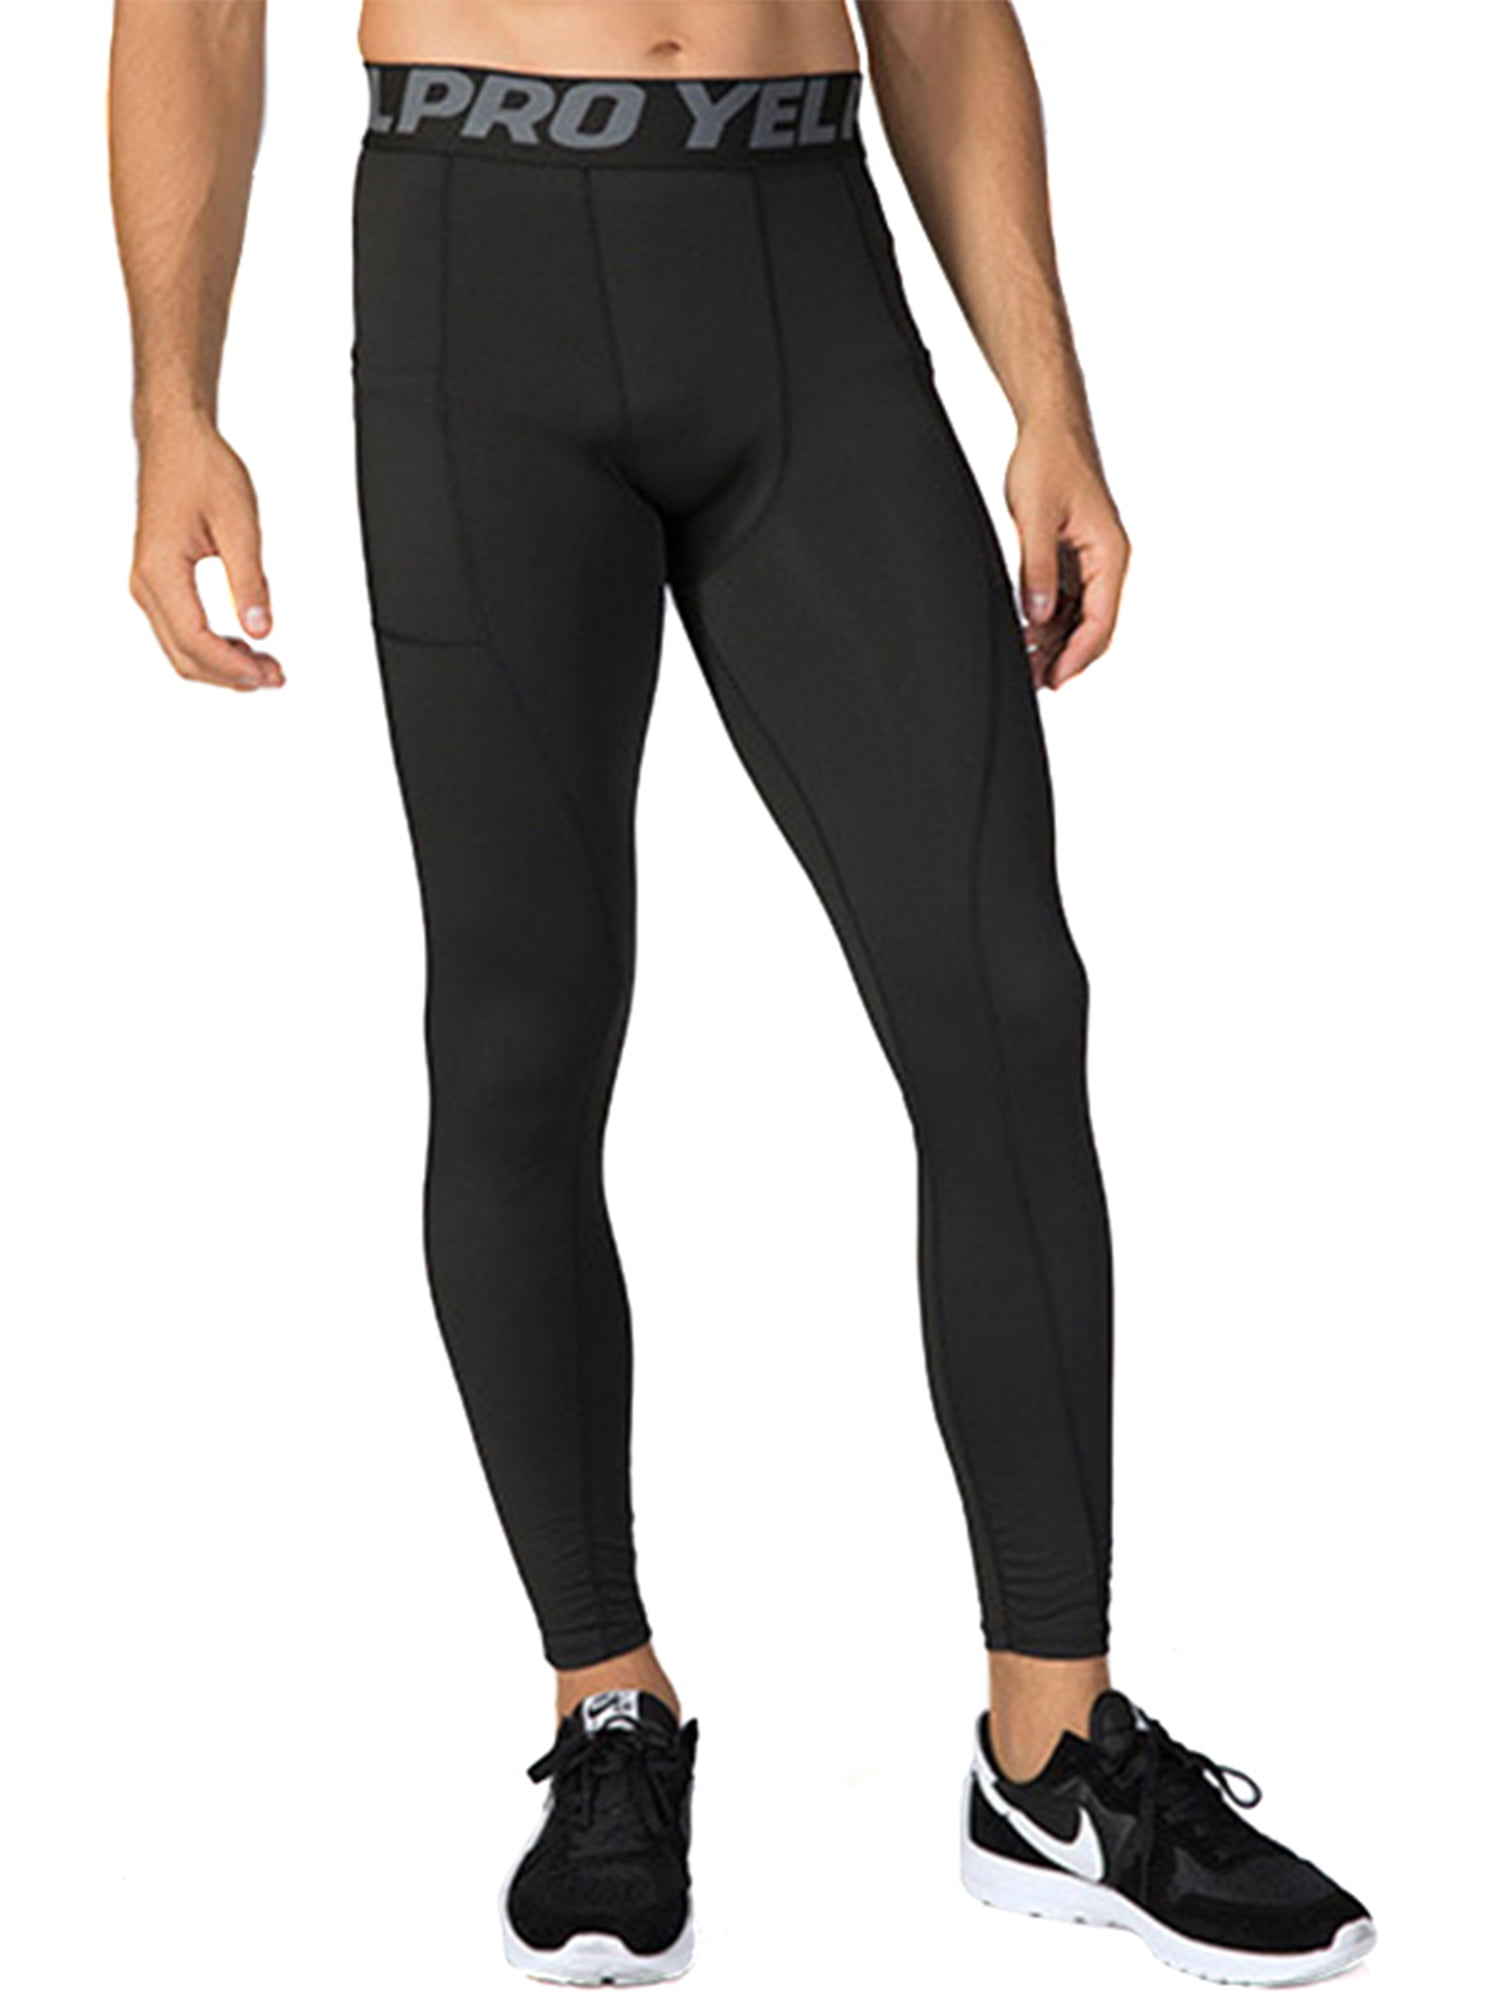 guisante En general Baya Men Letter Print Compression Pants Thermal Workout Cool Dry Sports Leggings  Fitness Running Tights Baselayer with Pocket - Walmart.com